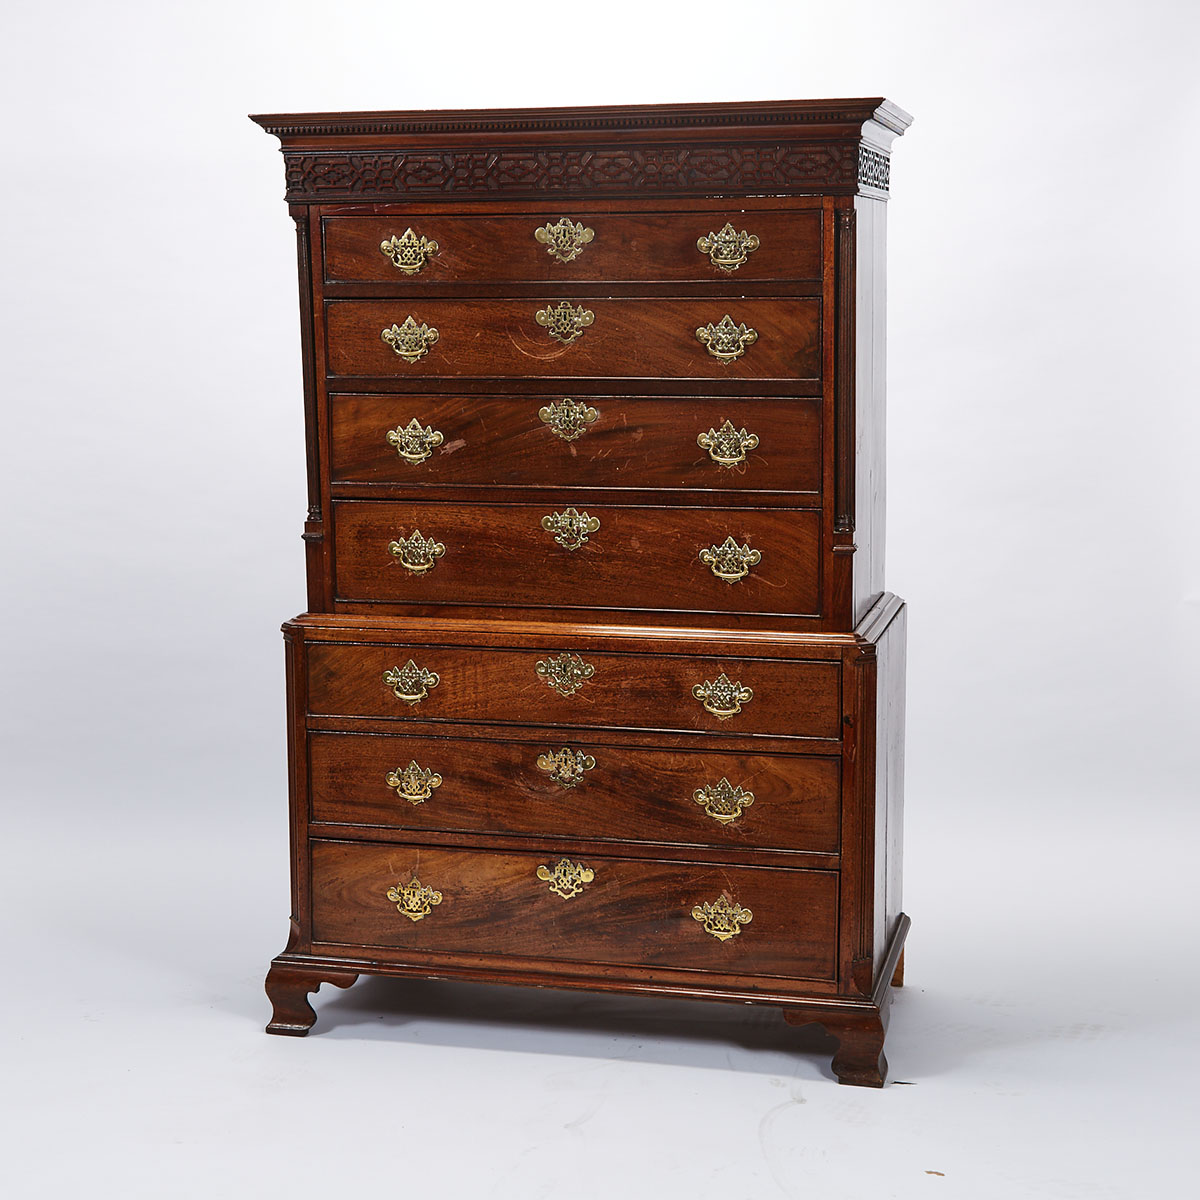 George III Mahogany Chest-on-Chest, 18th century